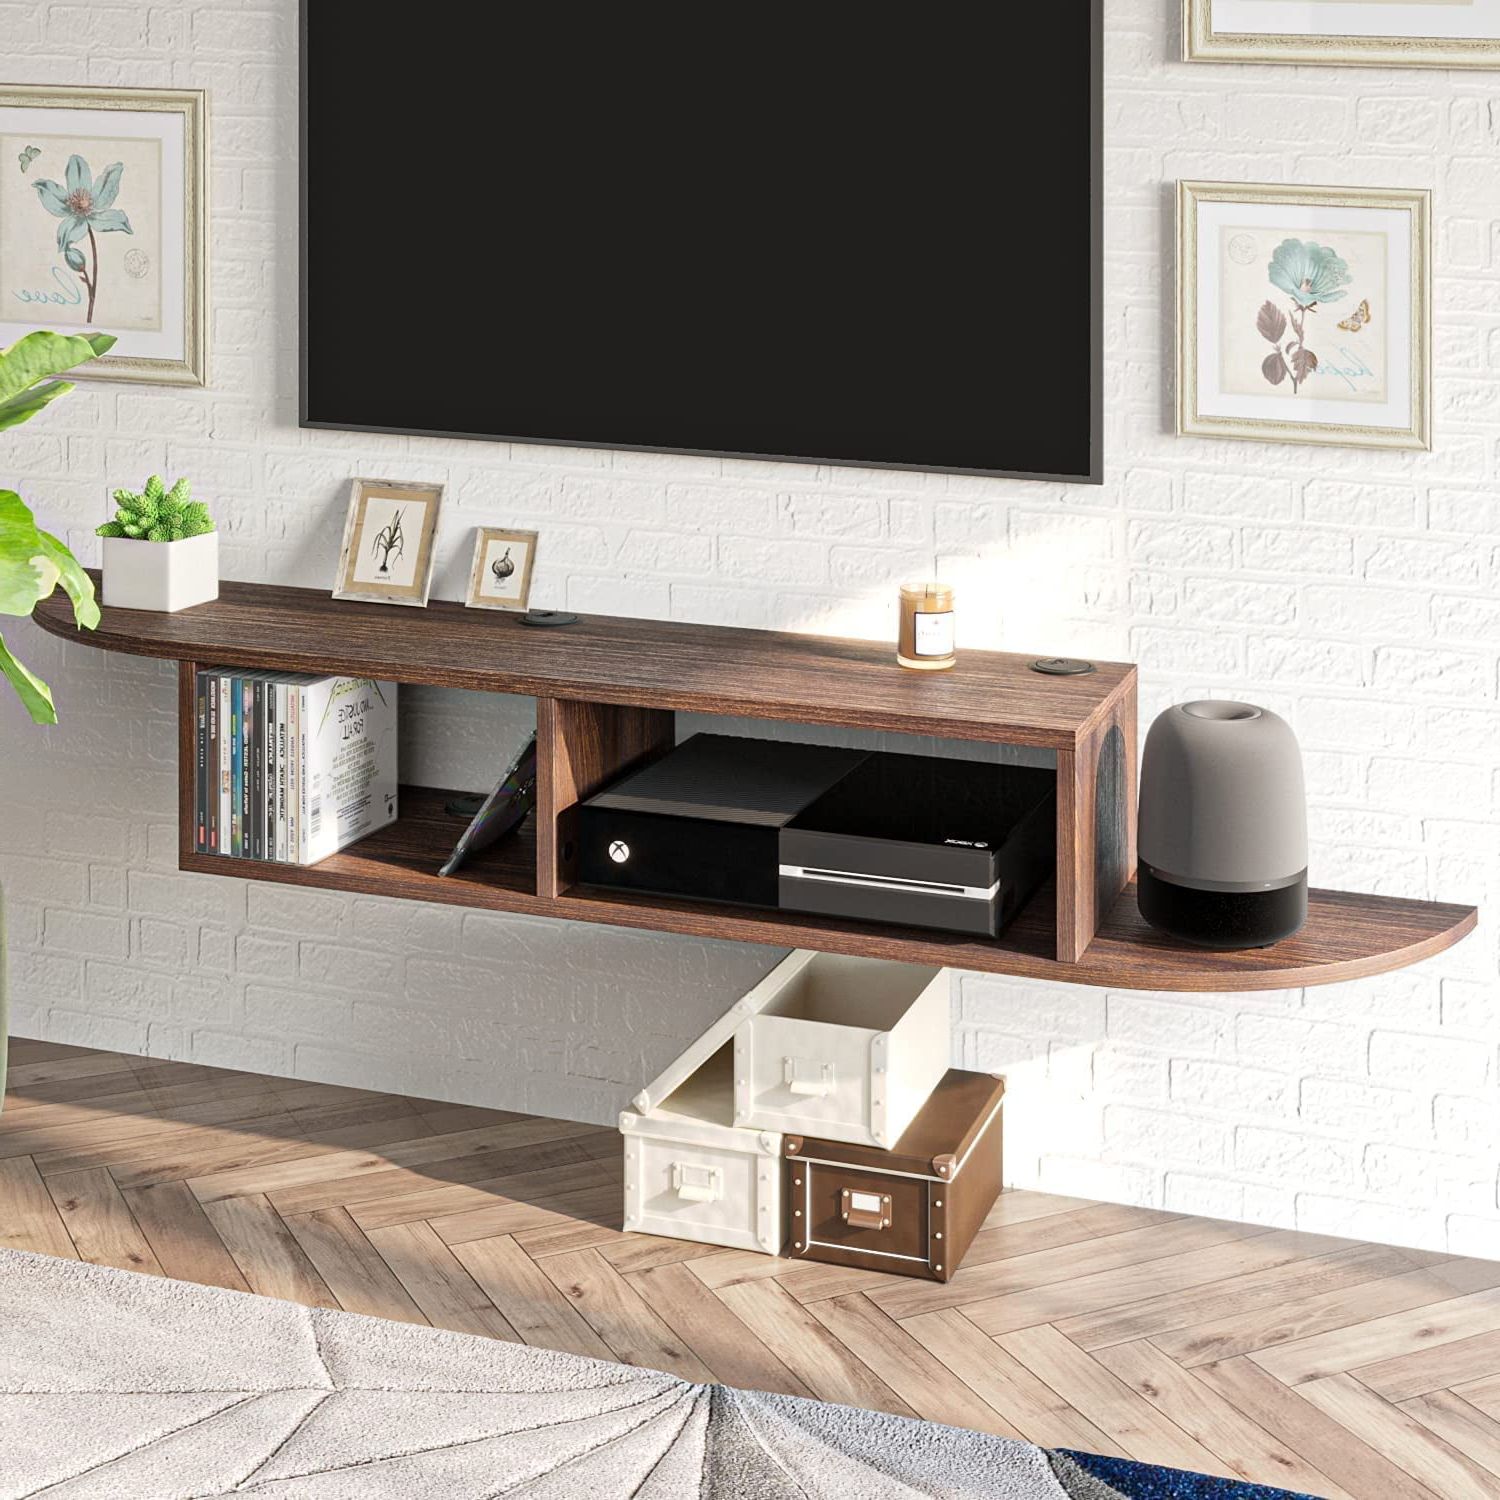 Floating Tv Stand, White Floating Tv Shelf, Wall Mounted Media Console  Entertainment Center For 55 Inch Tv, Storage Cabinet Under Tv, Walnut –  Walmart Intended For Top Shelf Mount Tv Stands (View 8 of 20)